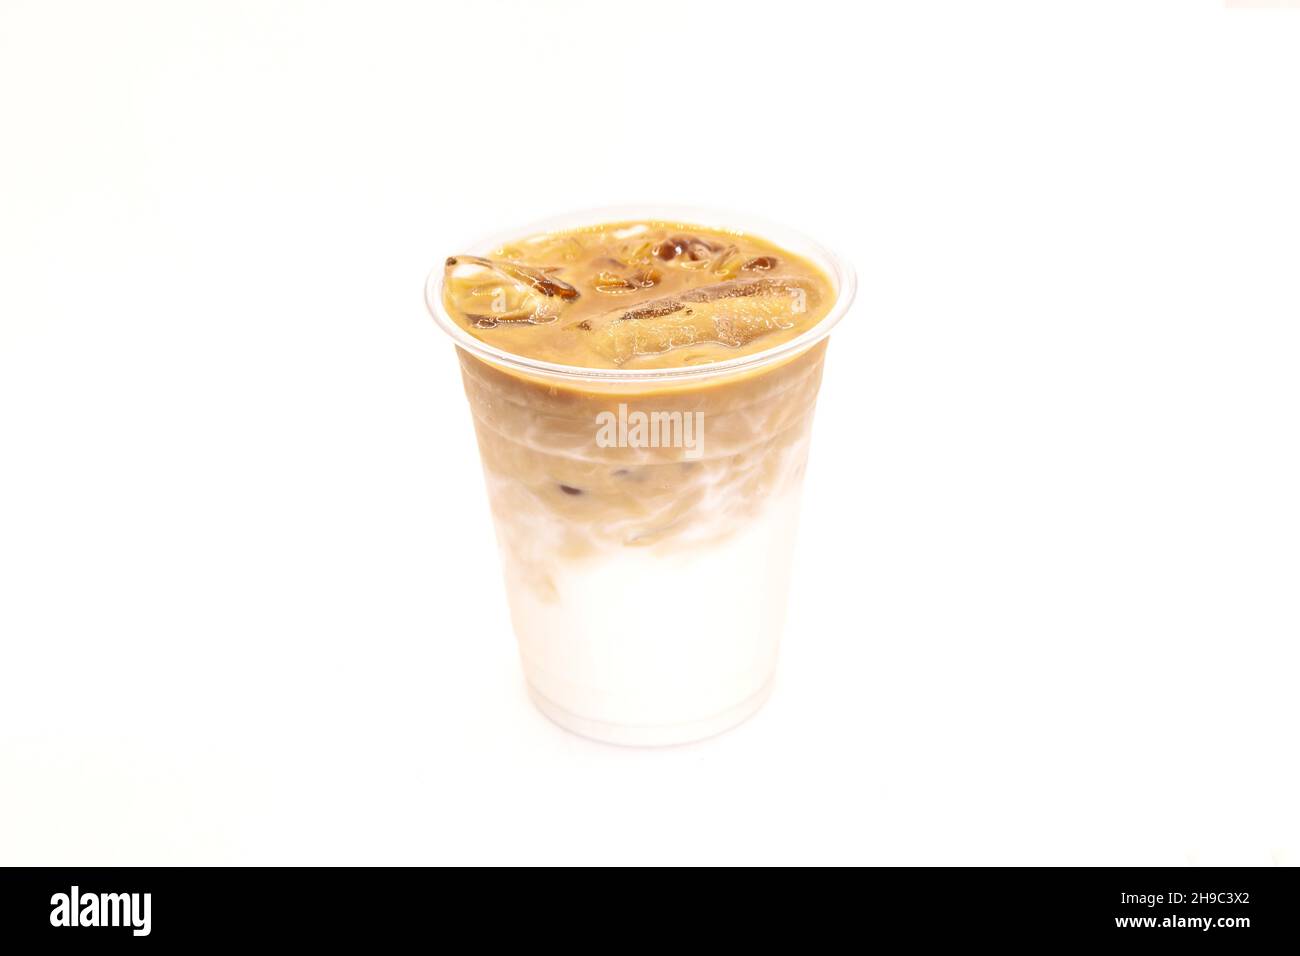 Iced latte or iced coffee in takeaway cup on white background